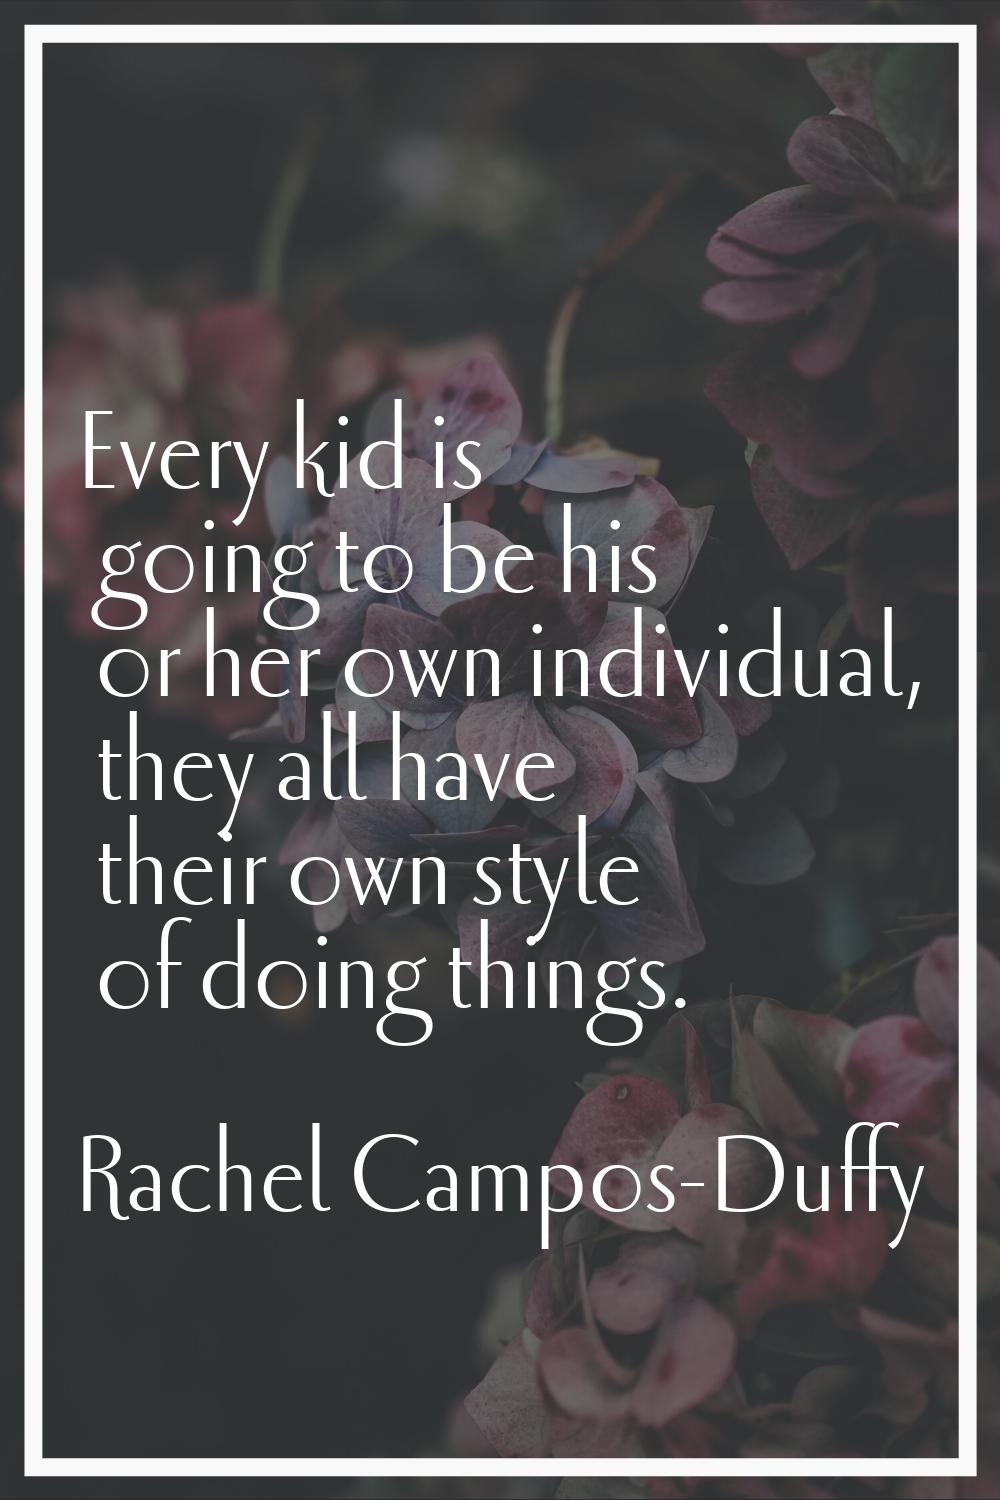 Every kid is going to be his or her own individual, they all have their own style of doing things.